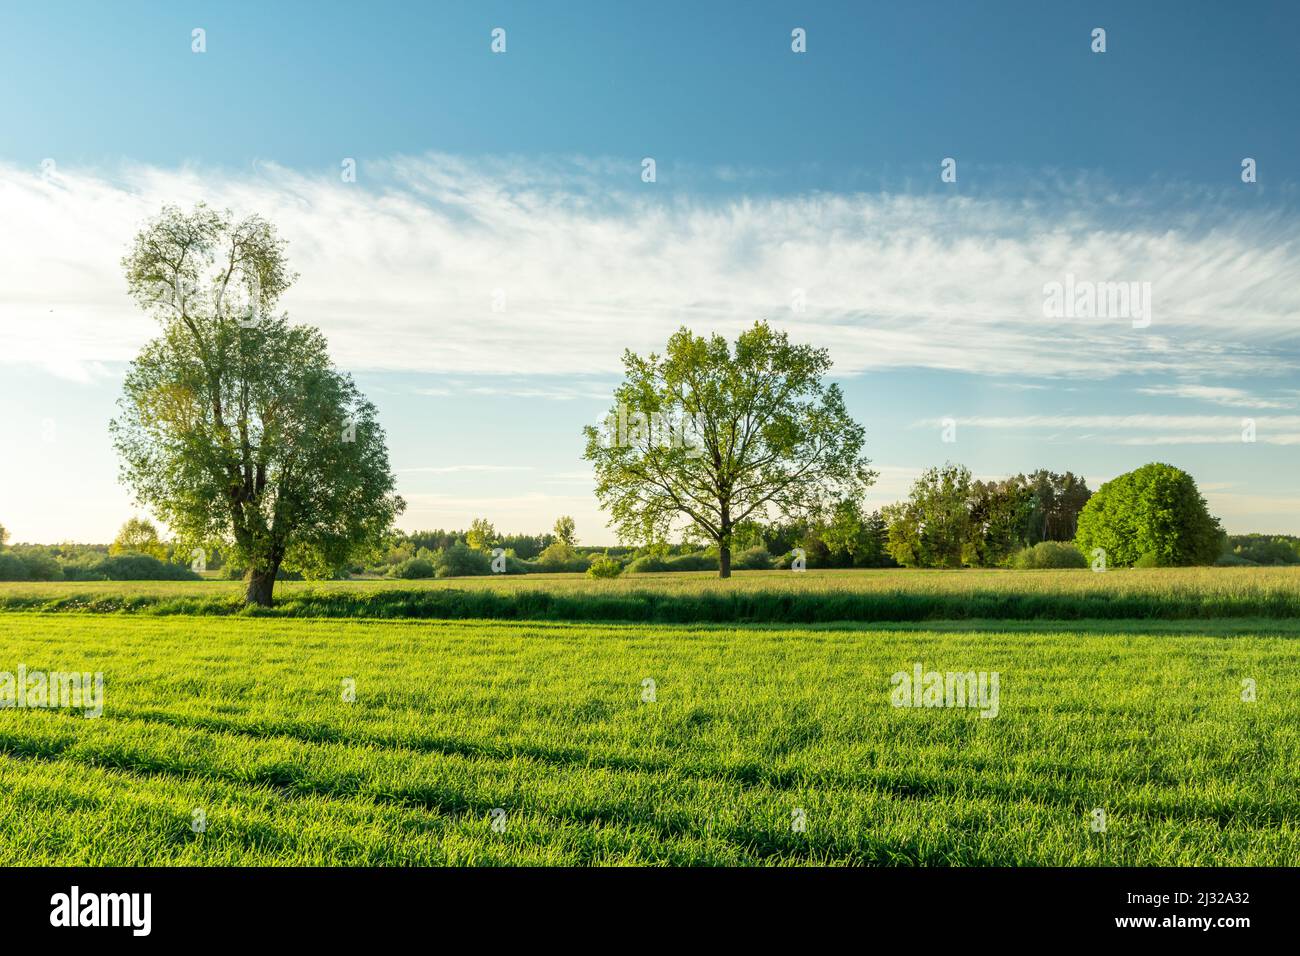 Green fields with trees and a white cloud on the sky, Nowiny, Poland Stock Photo